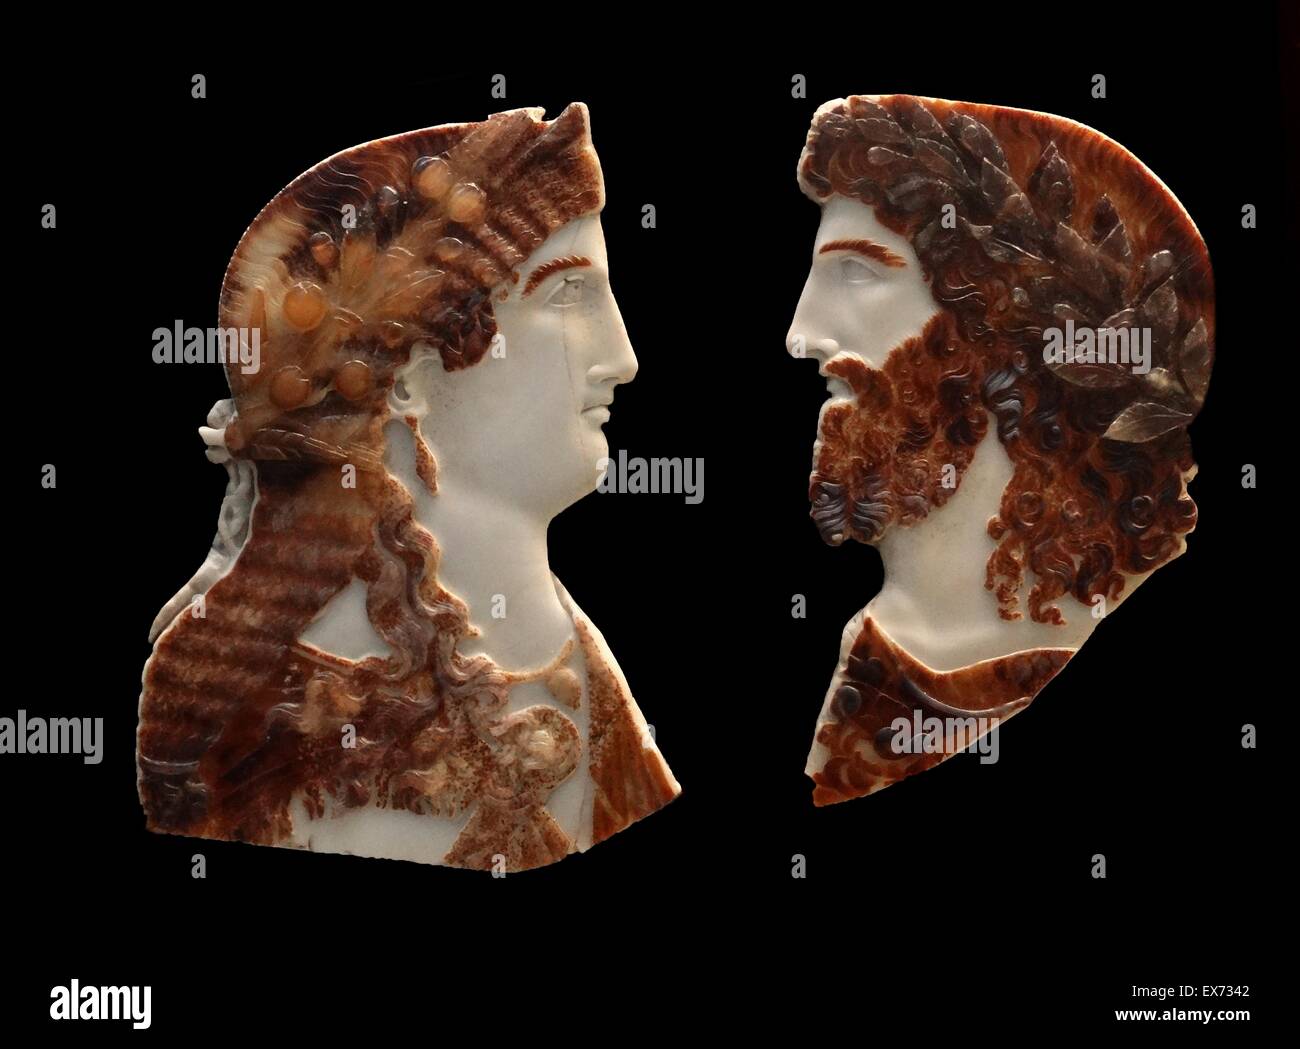 Sardonyx cameo busts of two members of the Roman Imperial family, depicted as Jupiter Ammon and Juno or Isis. About AD 37-50. The woman resembles the princesses of the imperial houses of Gaius (Caligula, AD 37-41) or Claudius (AD 41-54). The male figure i Stock Photo